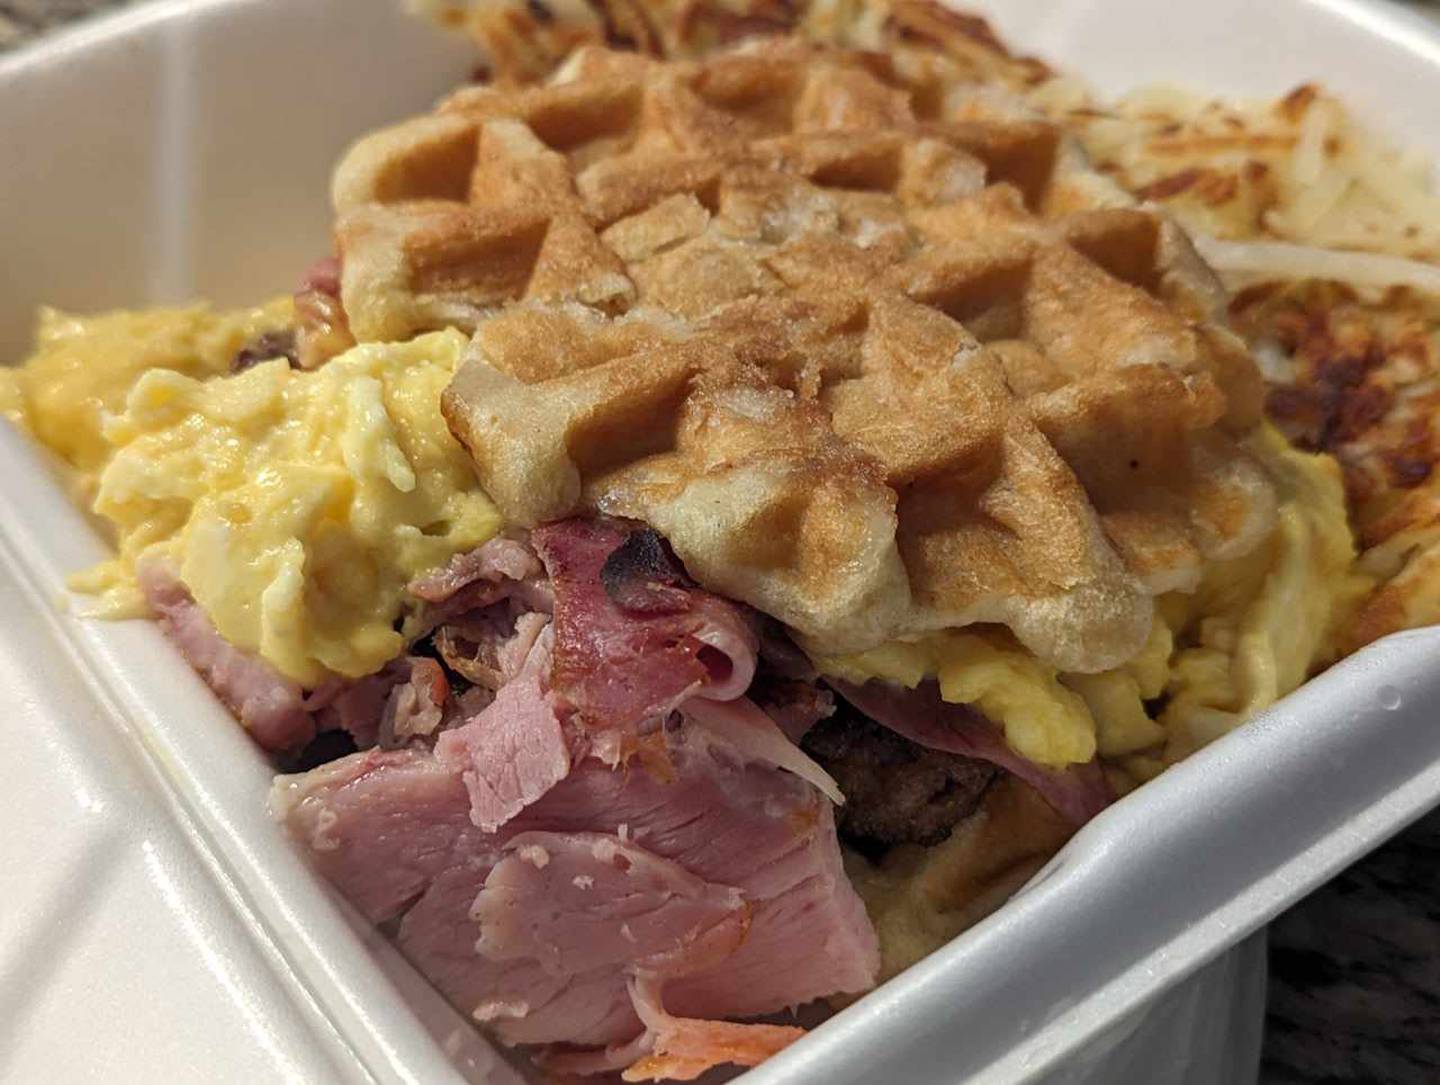 The Sugga Baby at the Southern Cafe in Crest Hill was a massive sandwich with two pearl sugar waffles glazed with maple syrup serving as bread. The filling consisted of hickory smoked bacon, house-made sausage, shaved ham slices and cheesey. scrambled eggs.